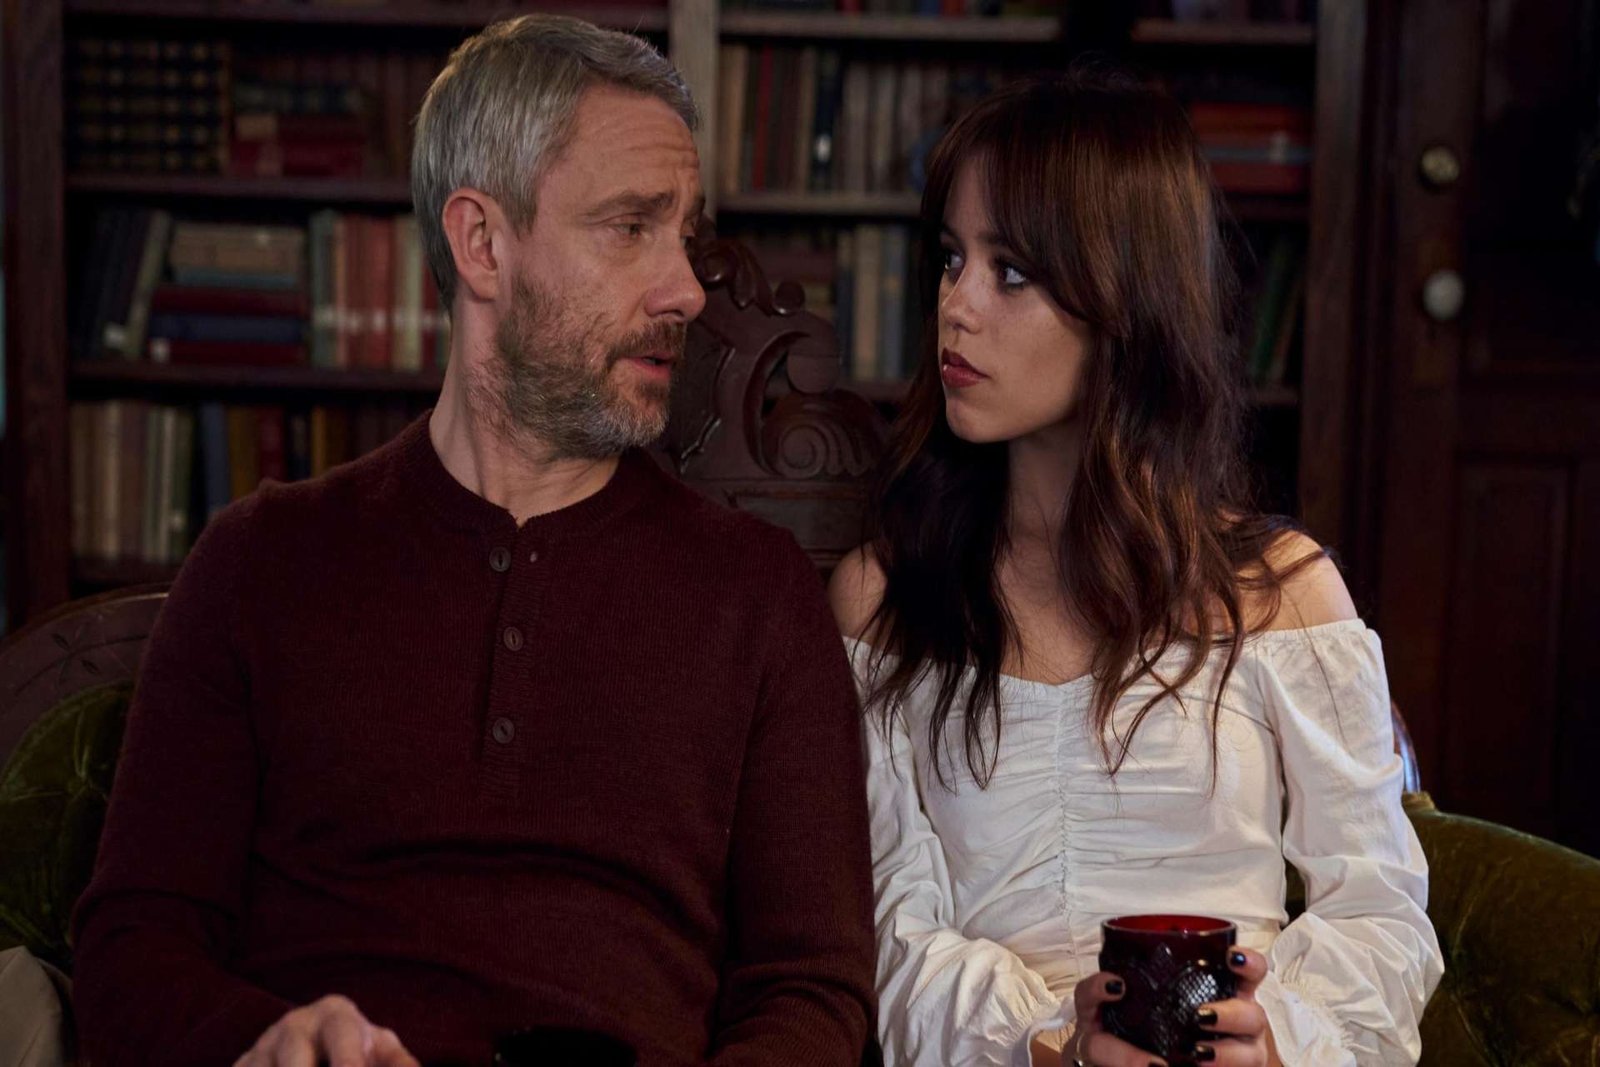 Jenna Ortega's Intimate Scenes with Martin Freeman in 'Miller's Girl' Spark Outrage and Controversy